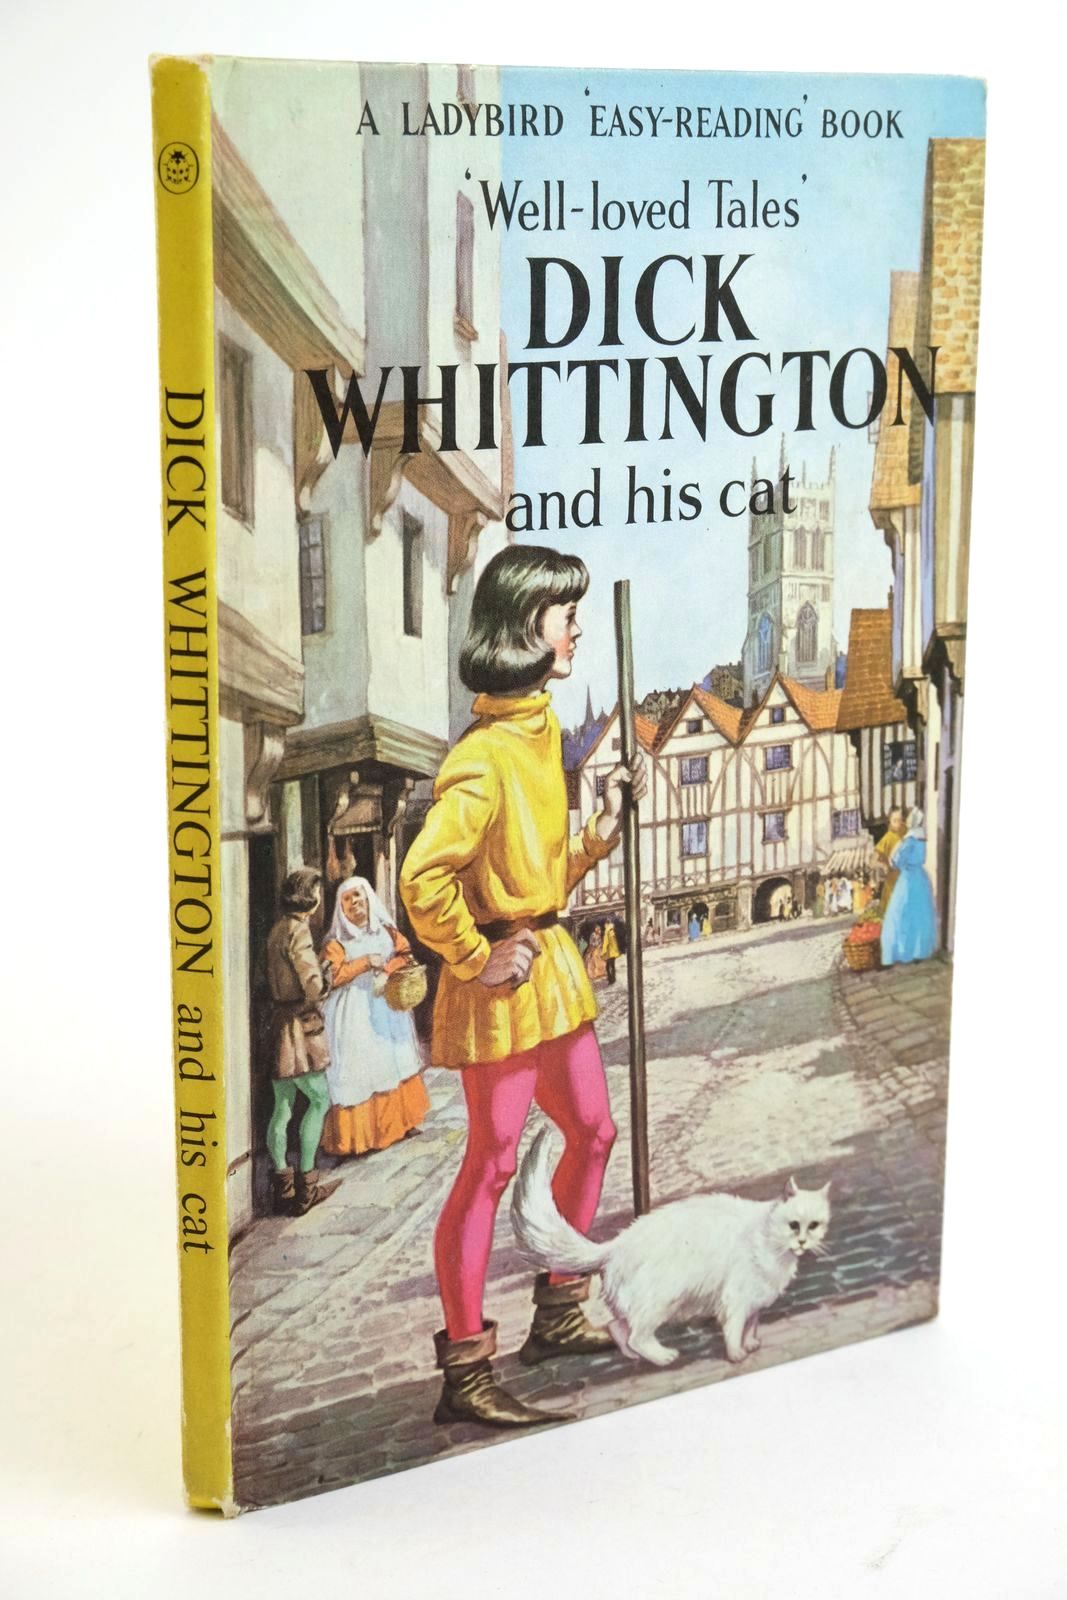 Photo of DICK WHITTINGTON AND HIS CAT written by Southgate, Vera illustrated by Winter, Eric published by Wills &amp; Hepworth Ltd. (STOCK CODE: 1322102)  for sale by Stella & Rose's Books